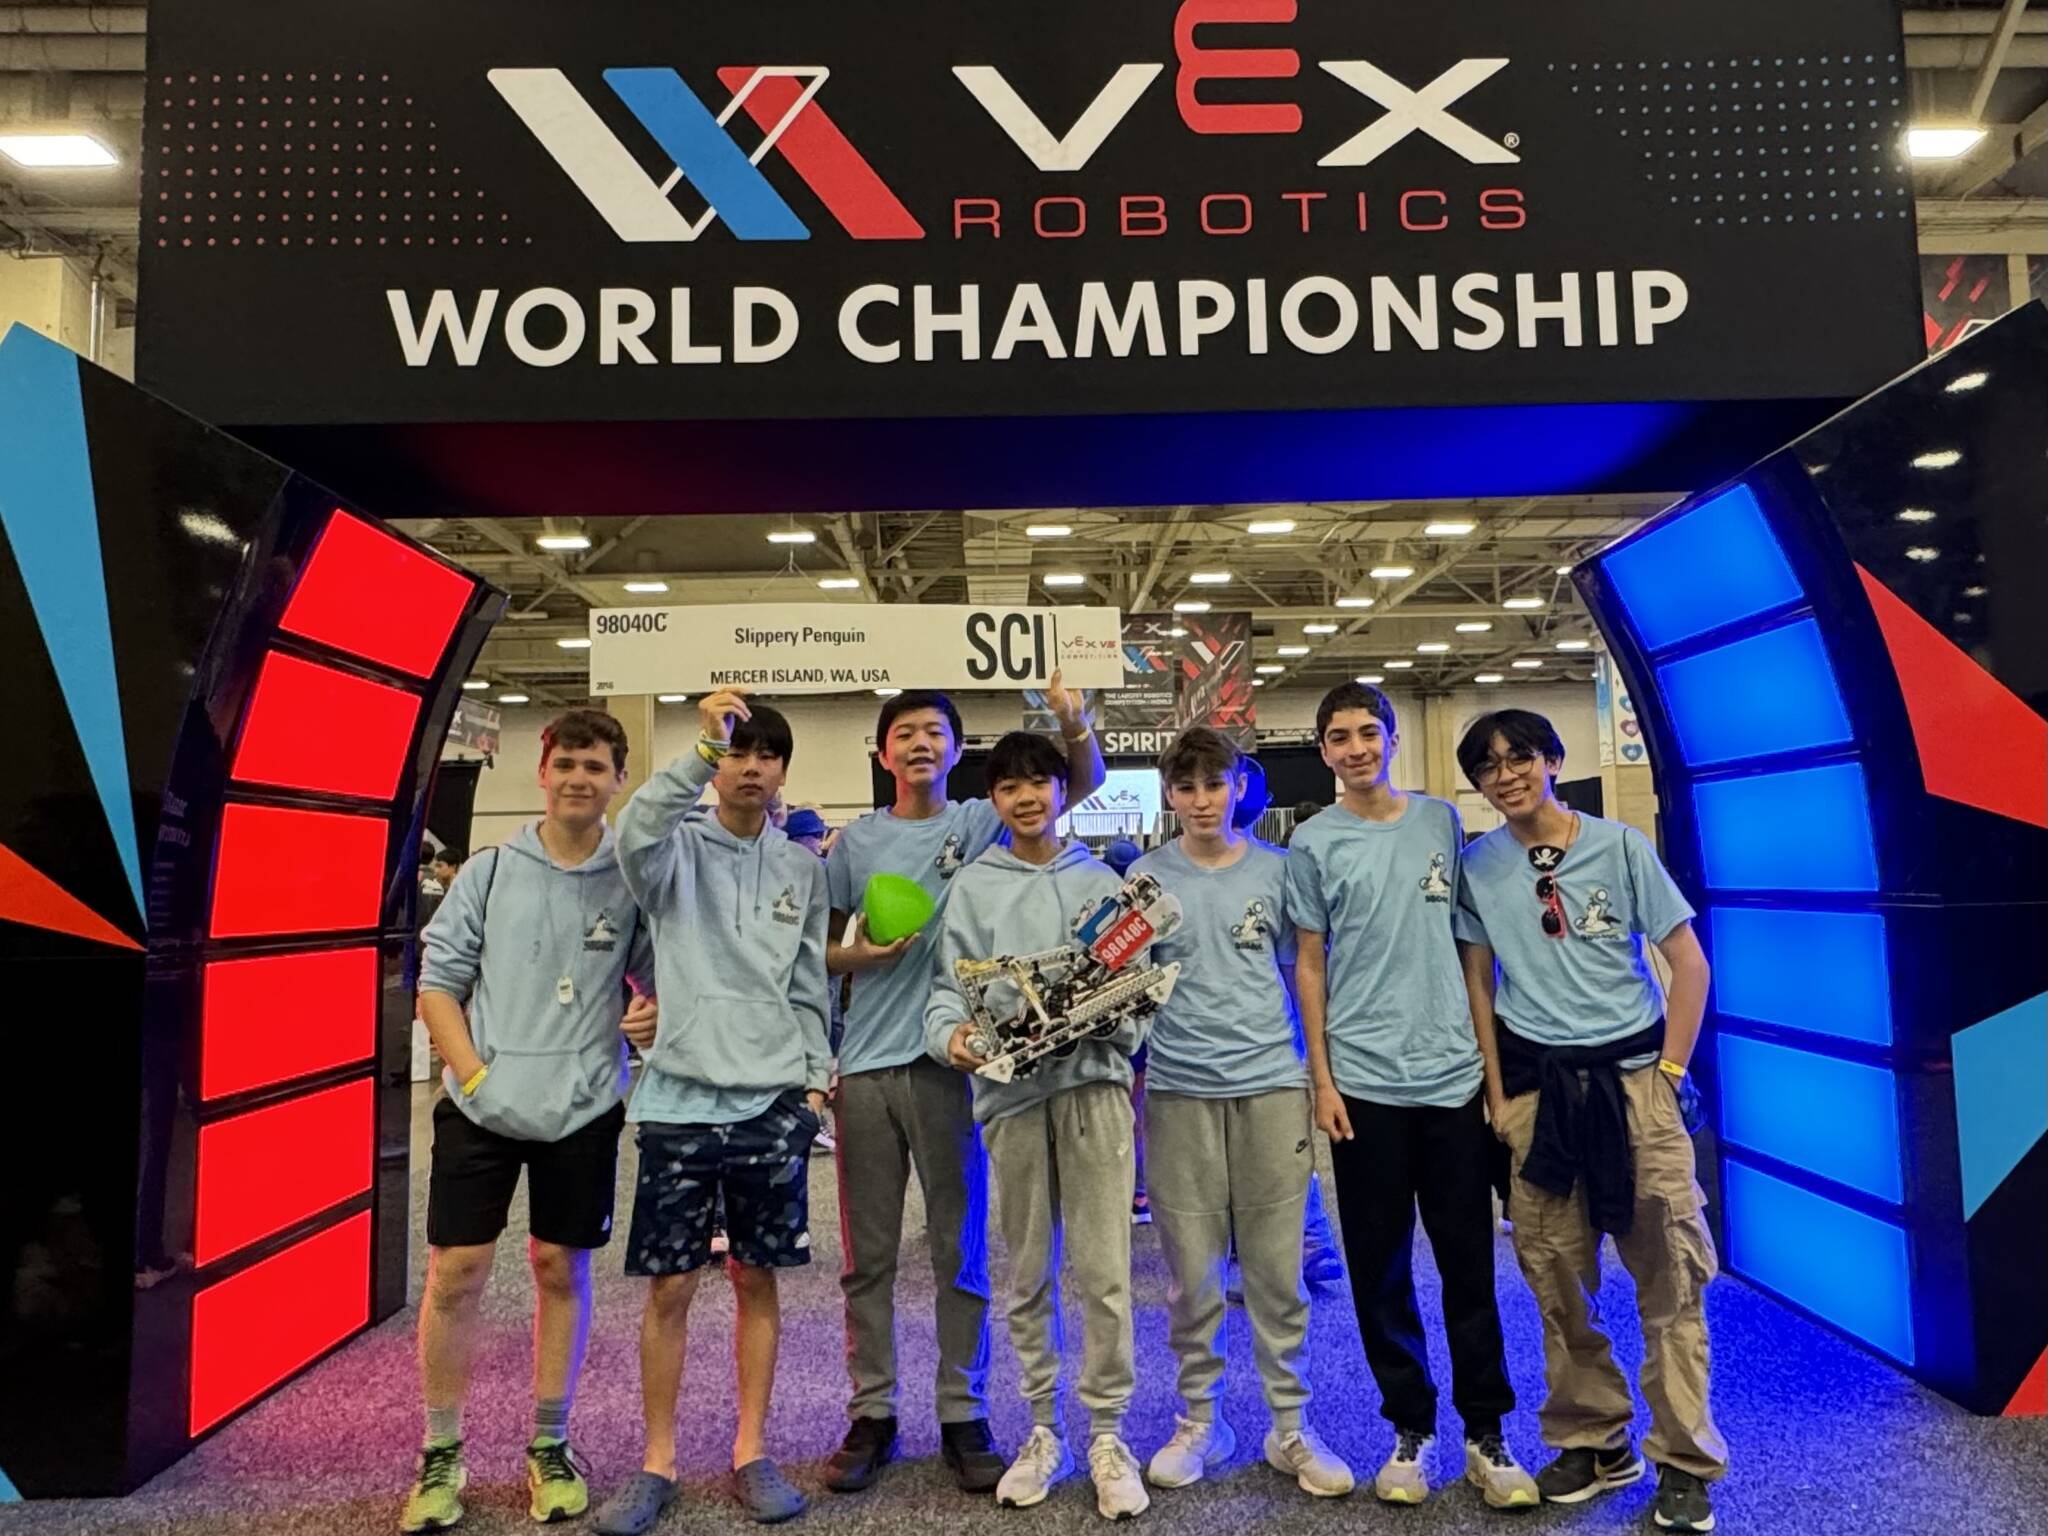 From left to right: Islander Middle School Slippery Penguin eighth-grade robotics team members are Zevi Danielli, Henry Xing, Brian Kwon, Harry Nguyen, Til Wyss, Kenan Khatib and Jeremy Leung. Photo courtesy of CJ Nguyen